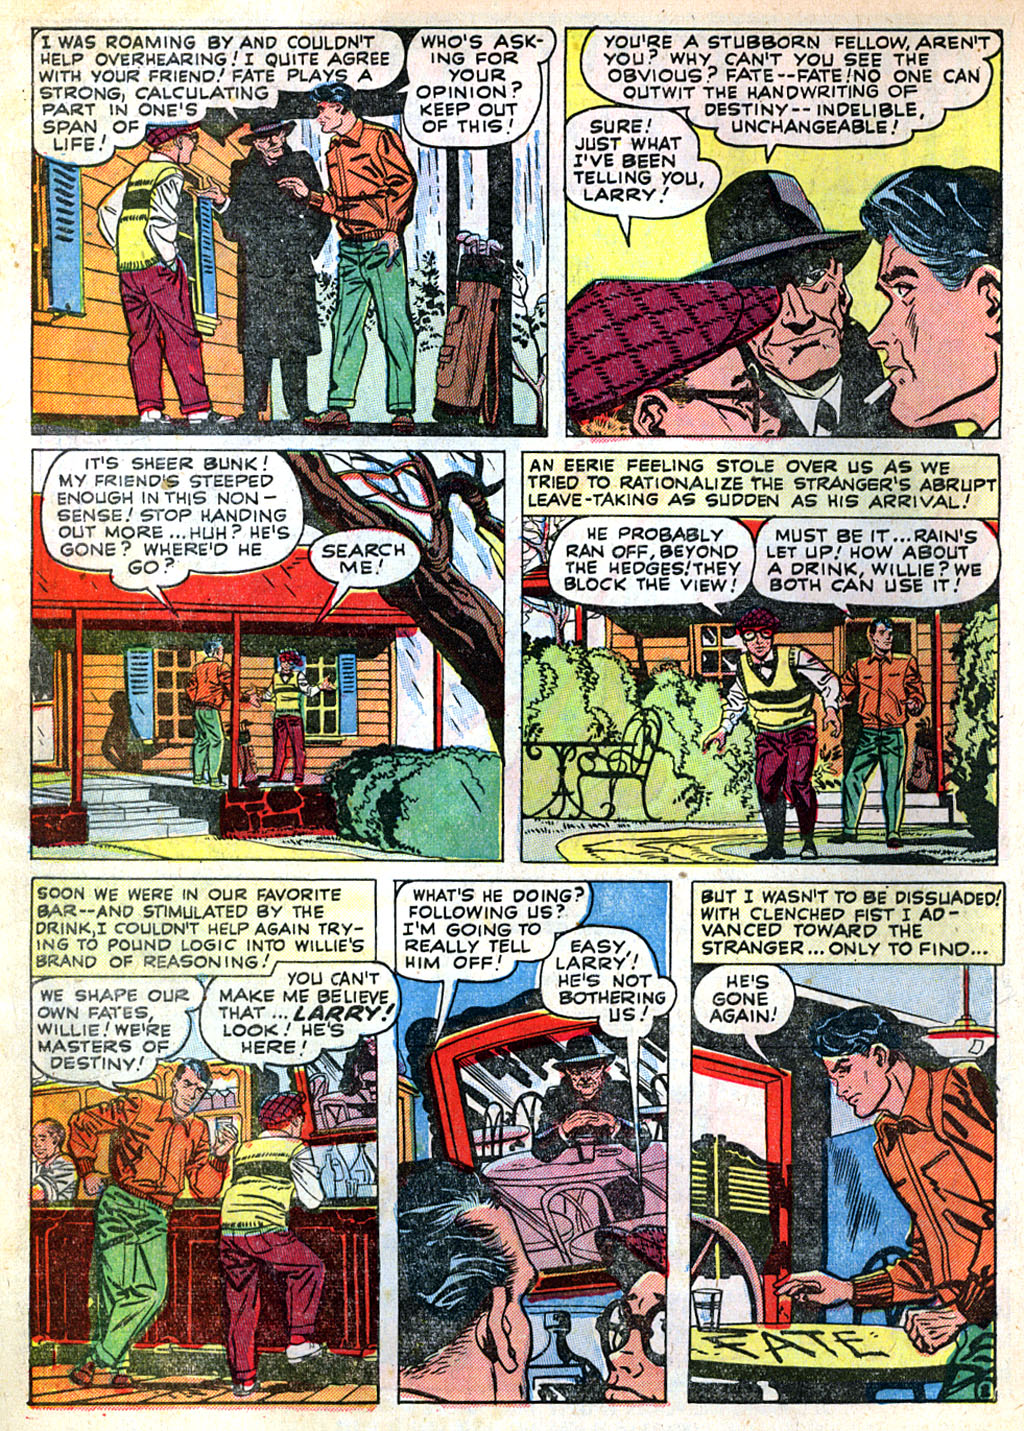 Marvel Tales (1949) 101 Page 3